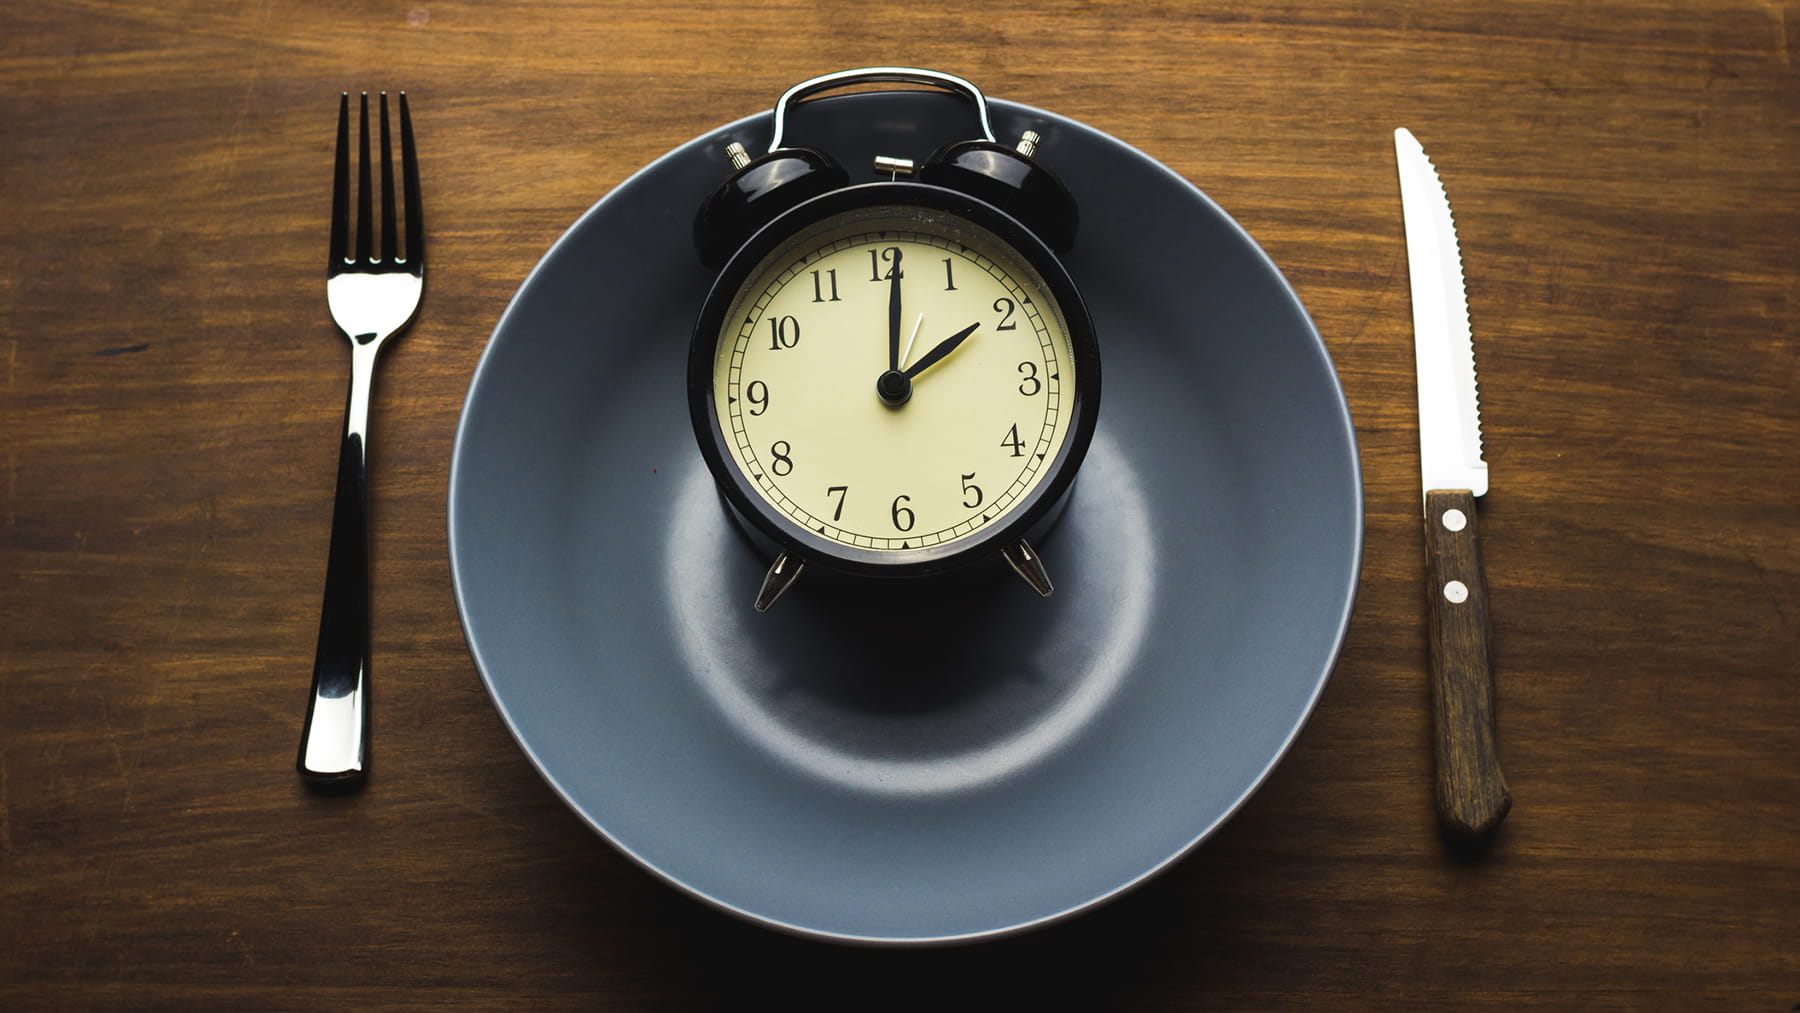 Does intermittent fasting work? | Ohio State Medical Center